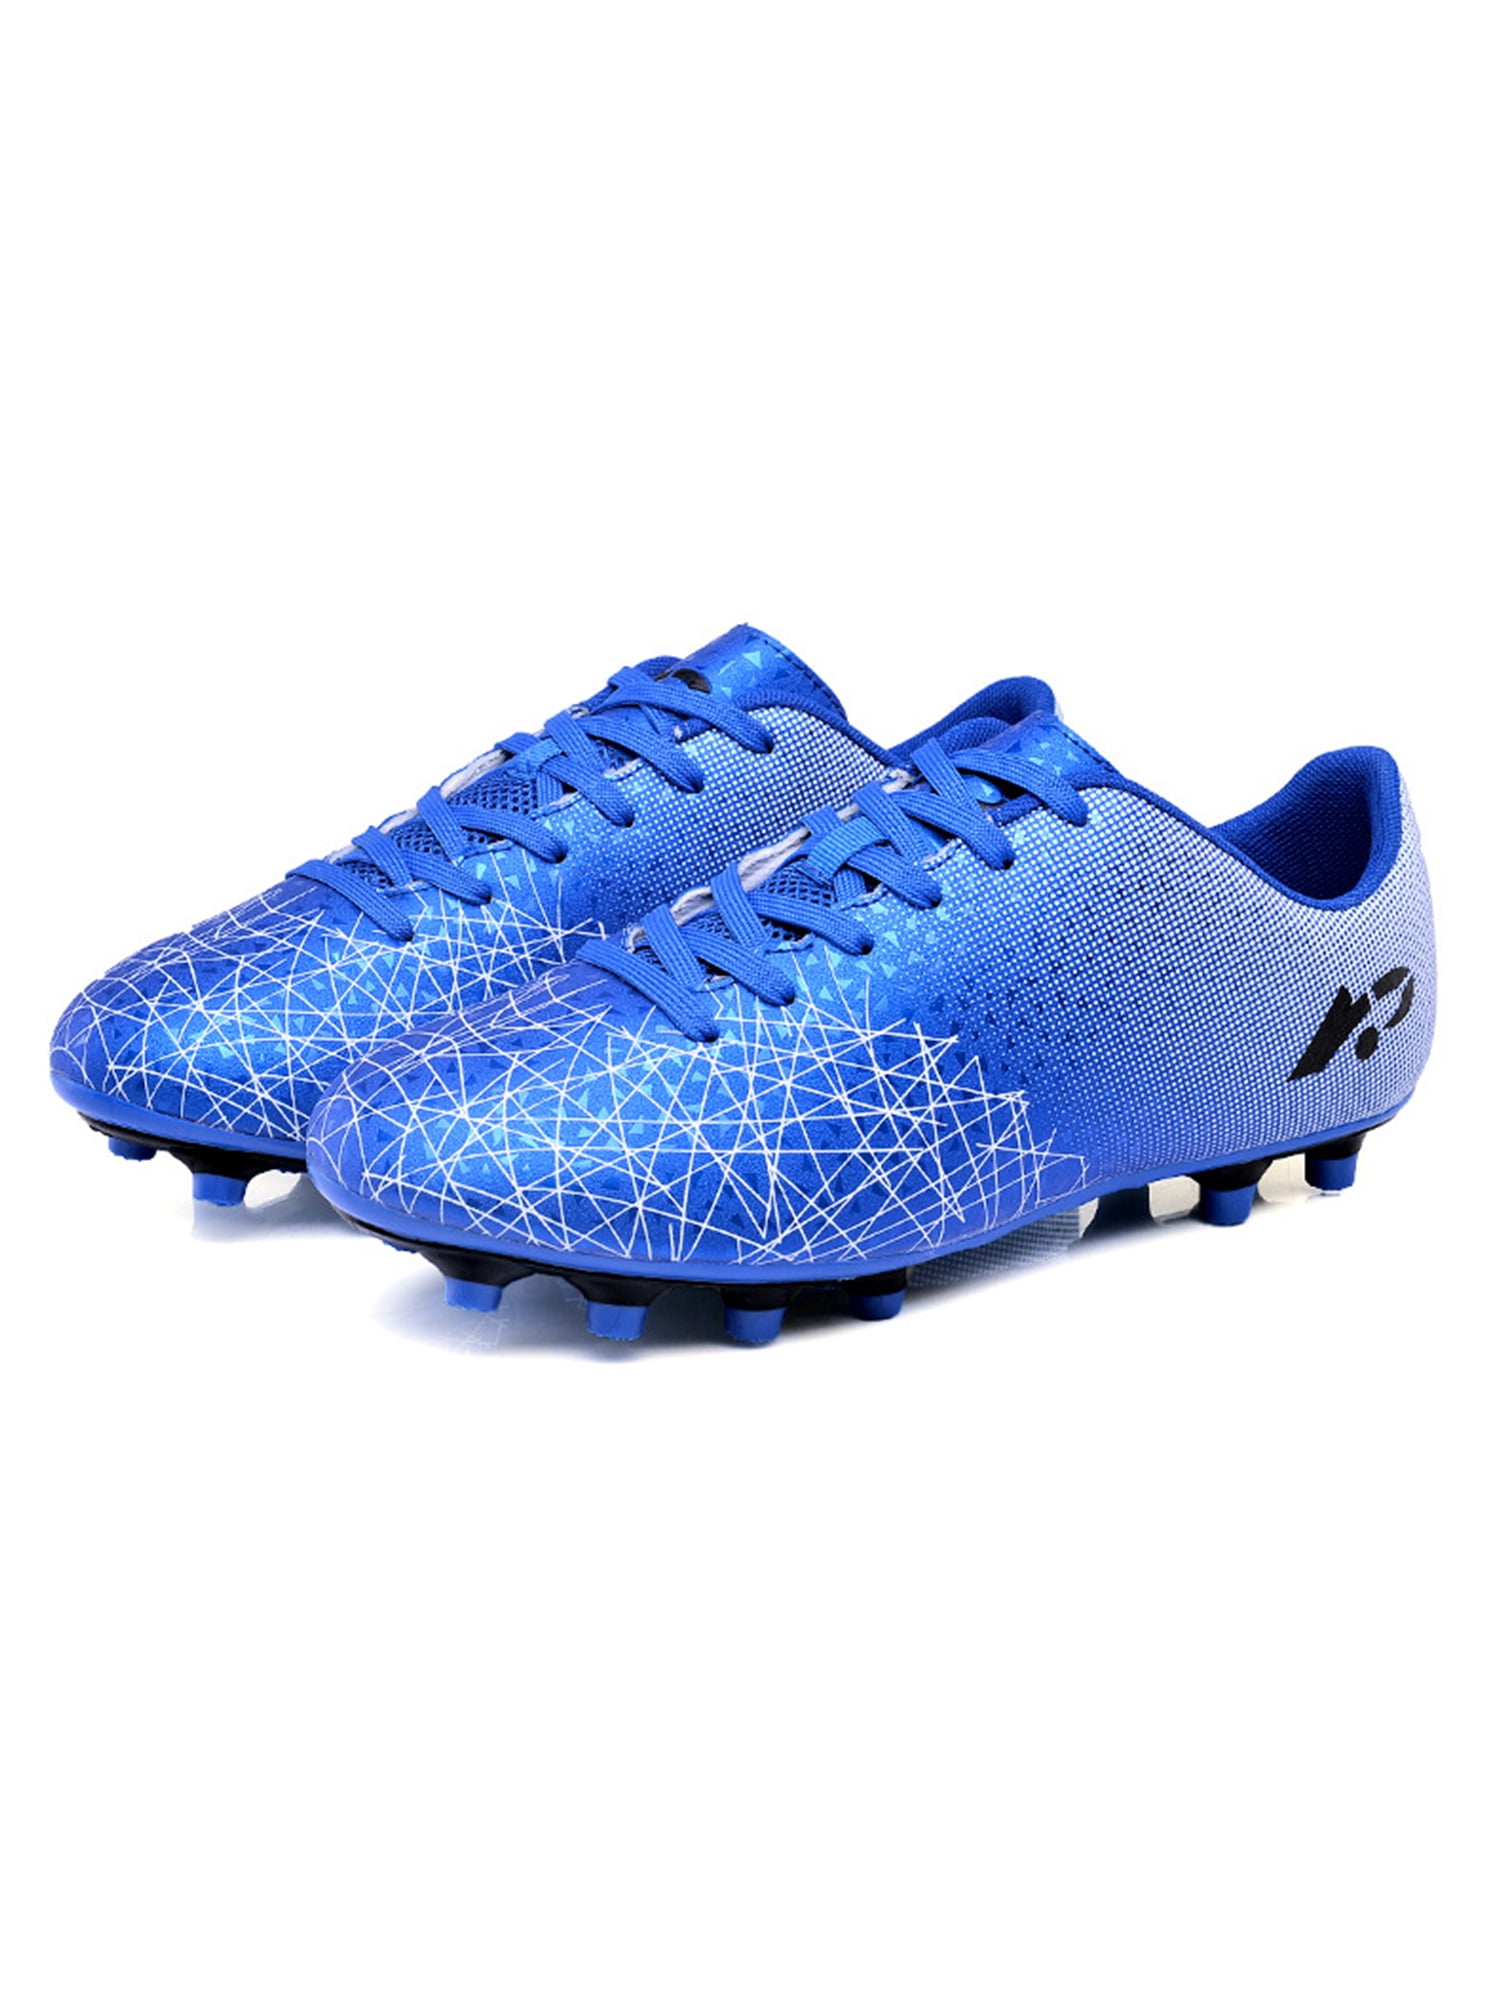 Mens Kids Girls Teens Outdoor Sports FG Studs Soccer Shoes Football Trainers 